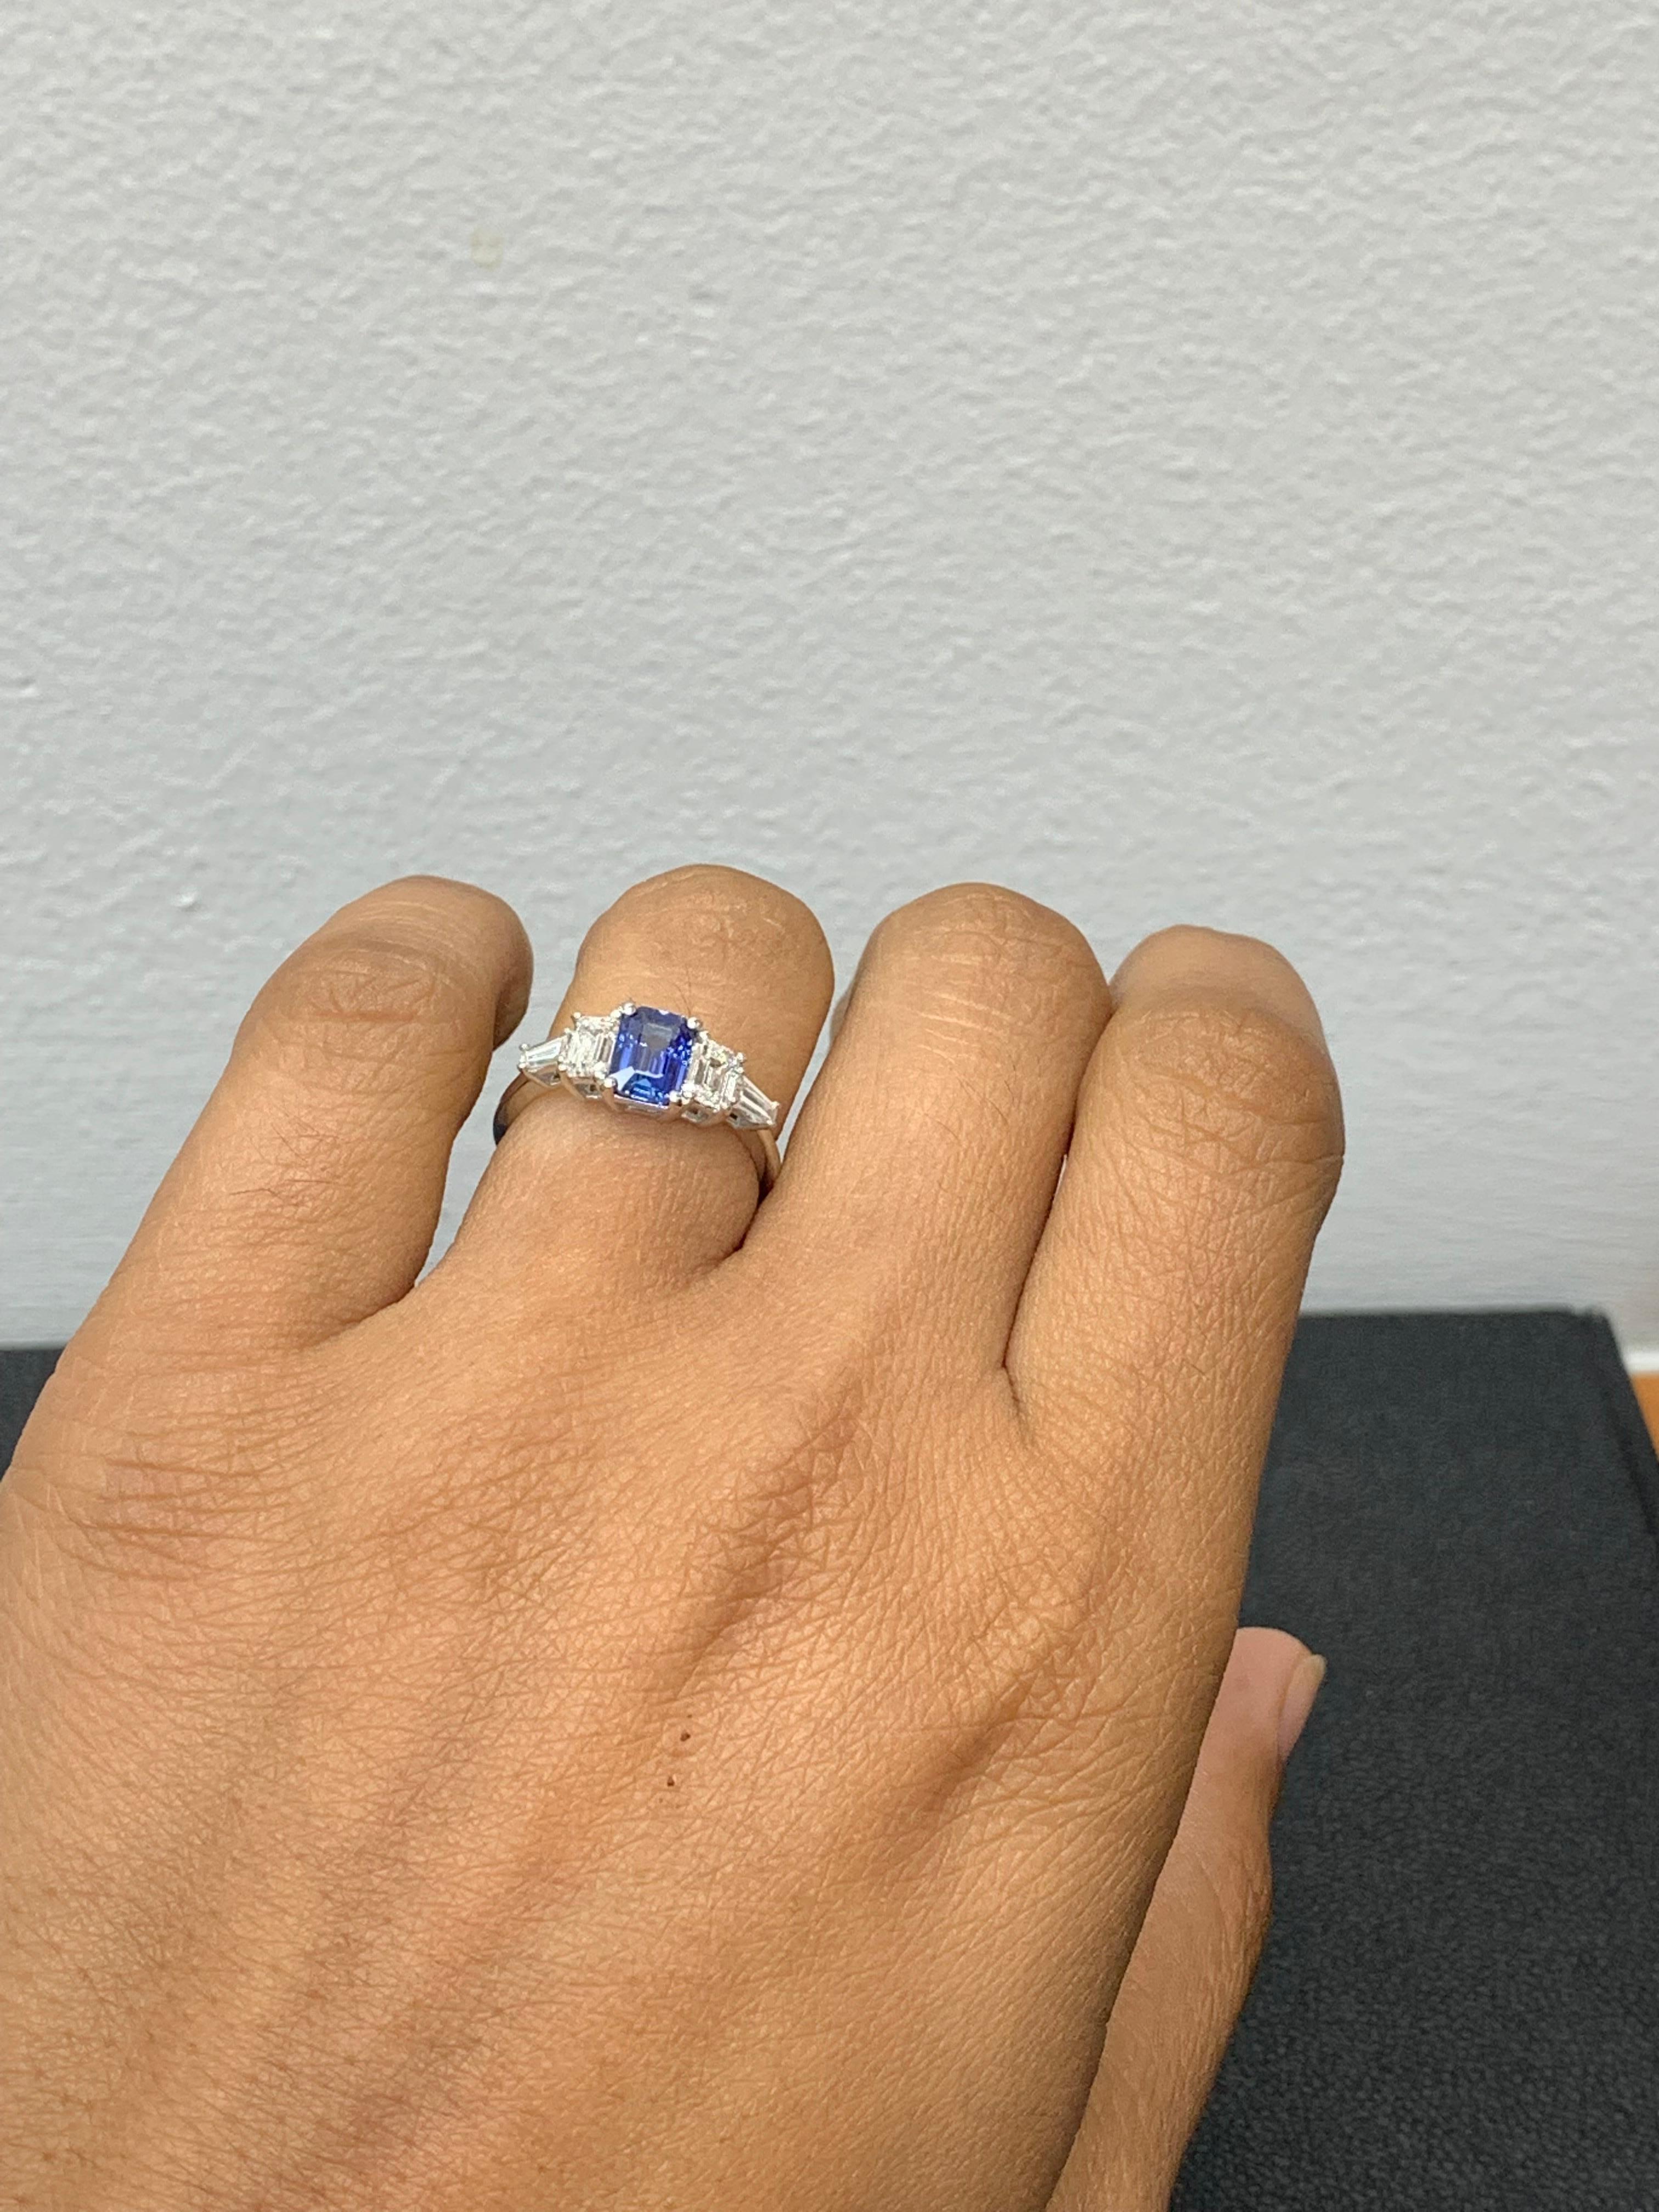 1.12 Carat Emerald Cut Blue Sapphire and Diamond 5 Stone Ring in 14K White Gold For Sale 4